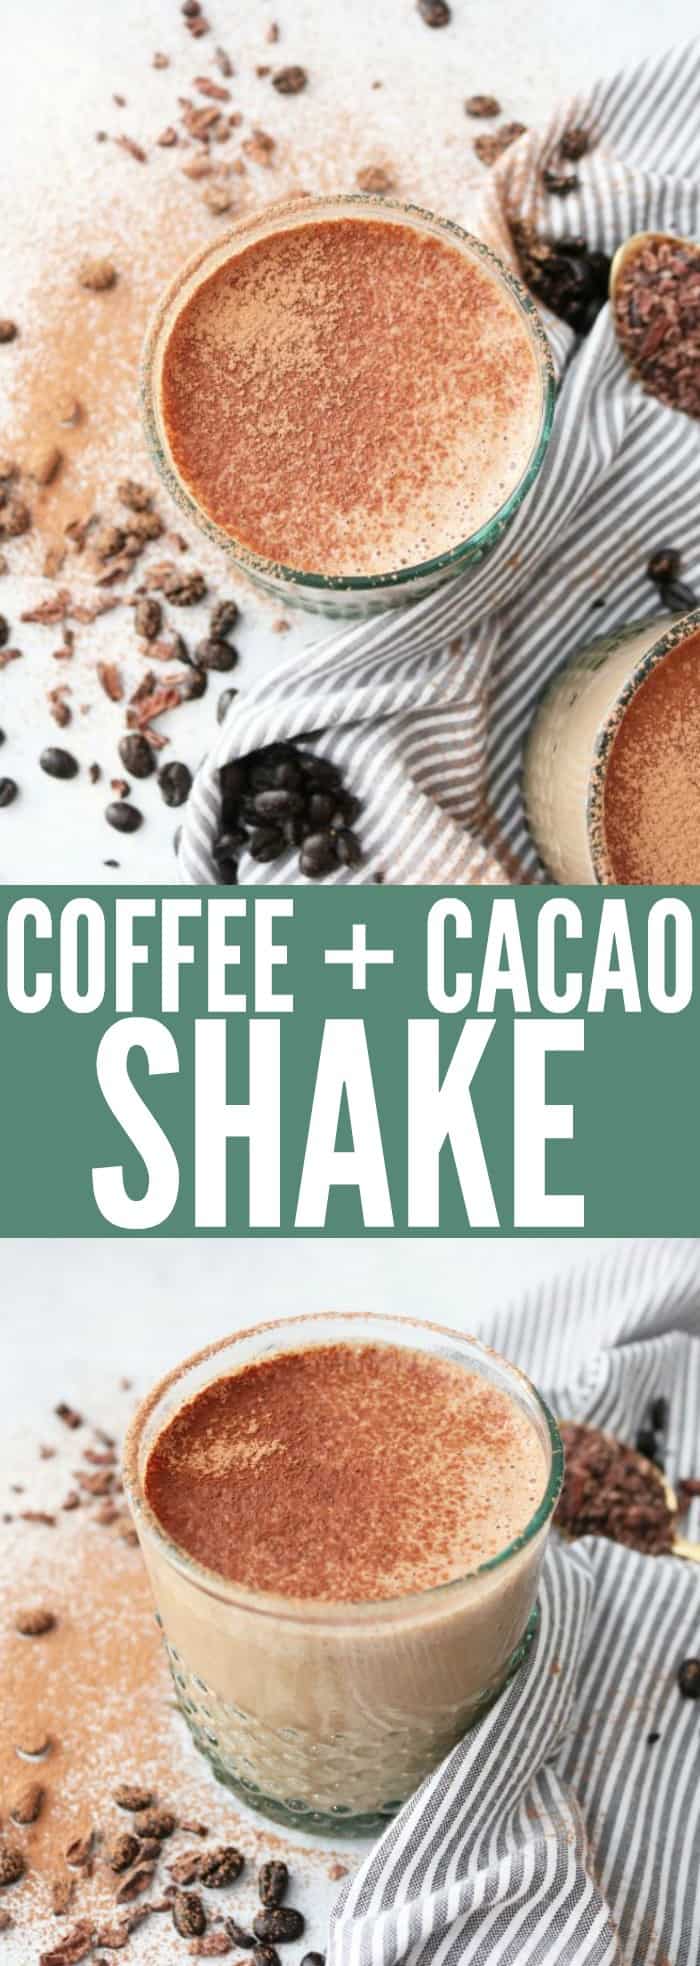 Delicious coffee and cacao shake! It's the perfect way to start your day, packed with protein and fiber and COFFEE!! Your new favorite breakfast treat! thetoastedpinenut.com #breakfast #smoothie #shake #paleo #glutenfree